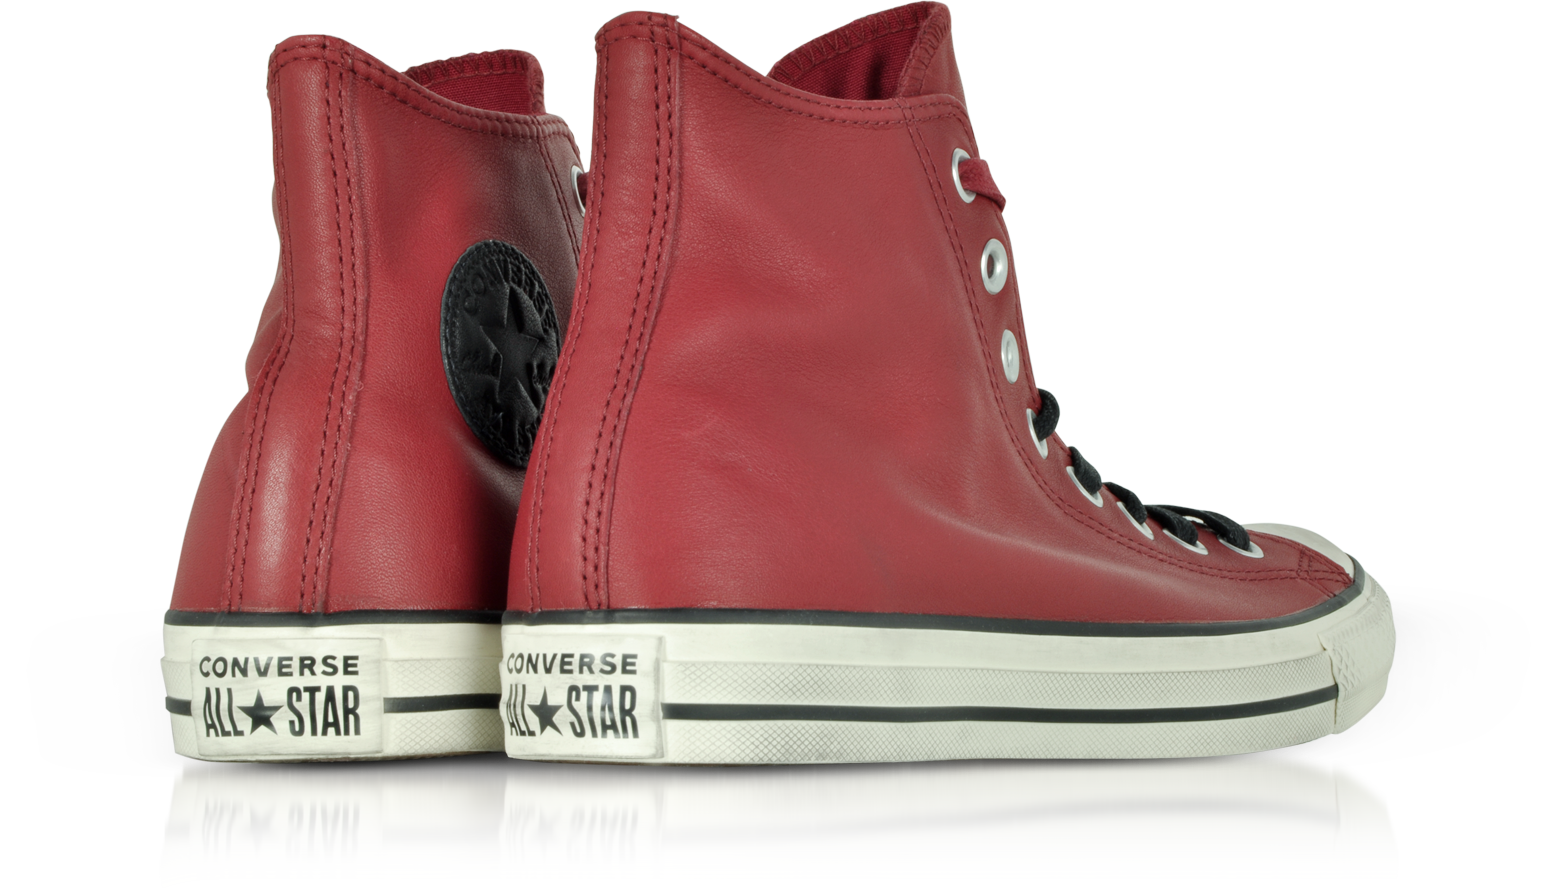 Chuck Taylor All Star High Flatform Sneakers in Pelle Rossa Converse  Limited Edition 7.5 (41 EU) su FORZIERI